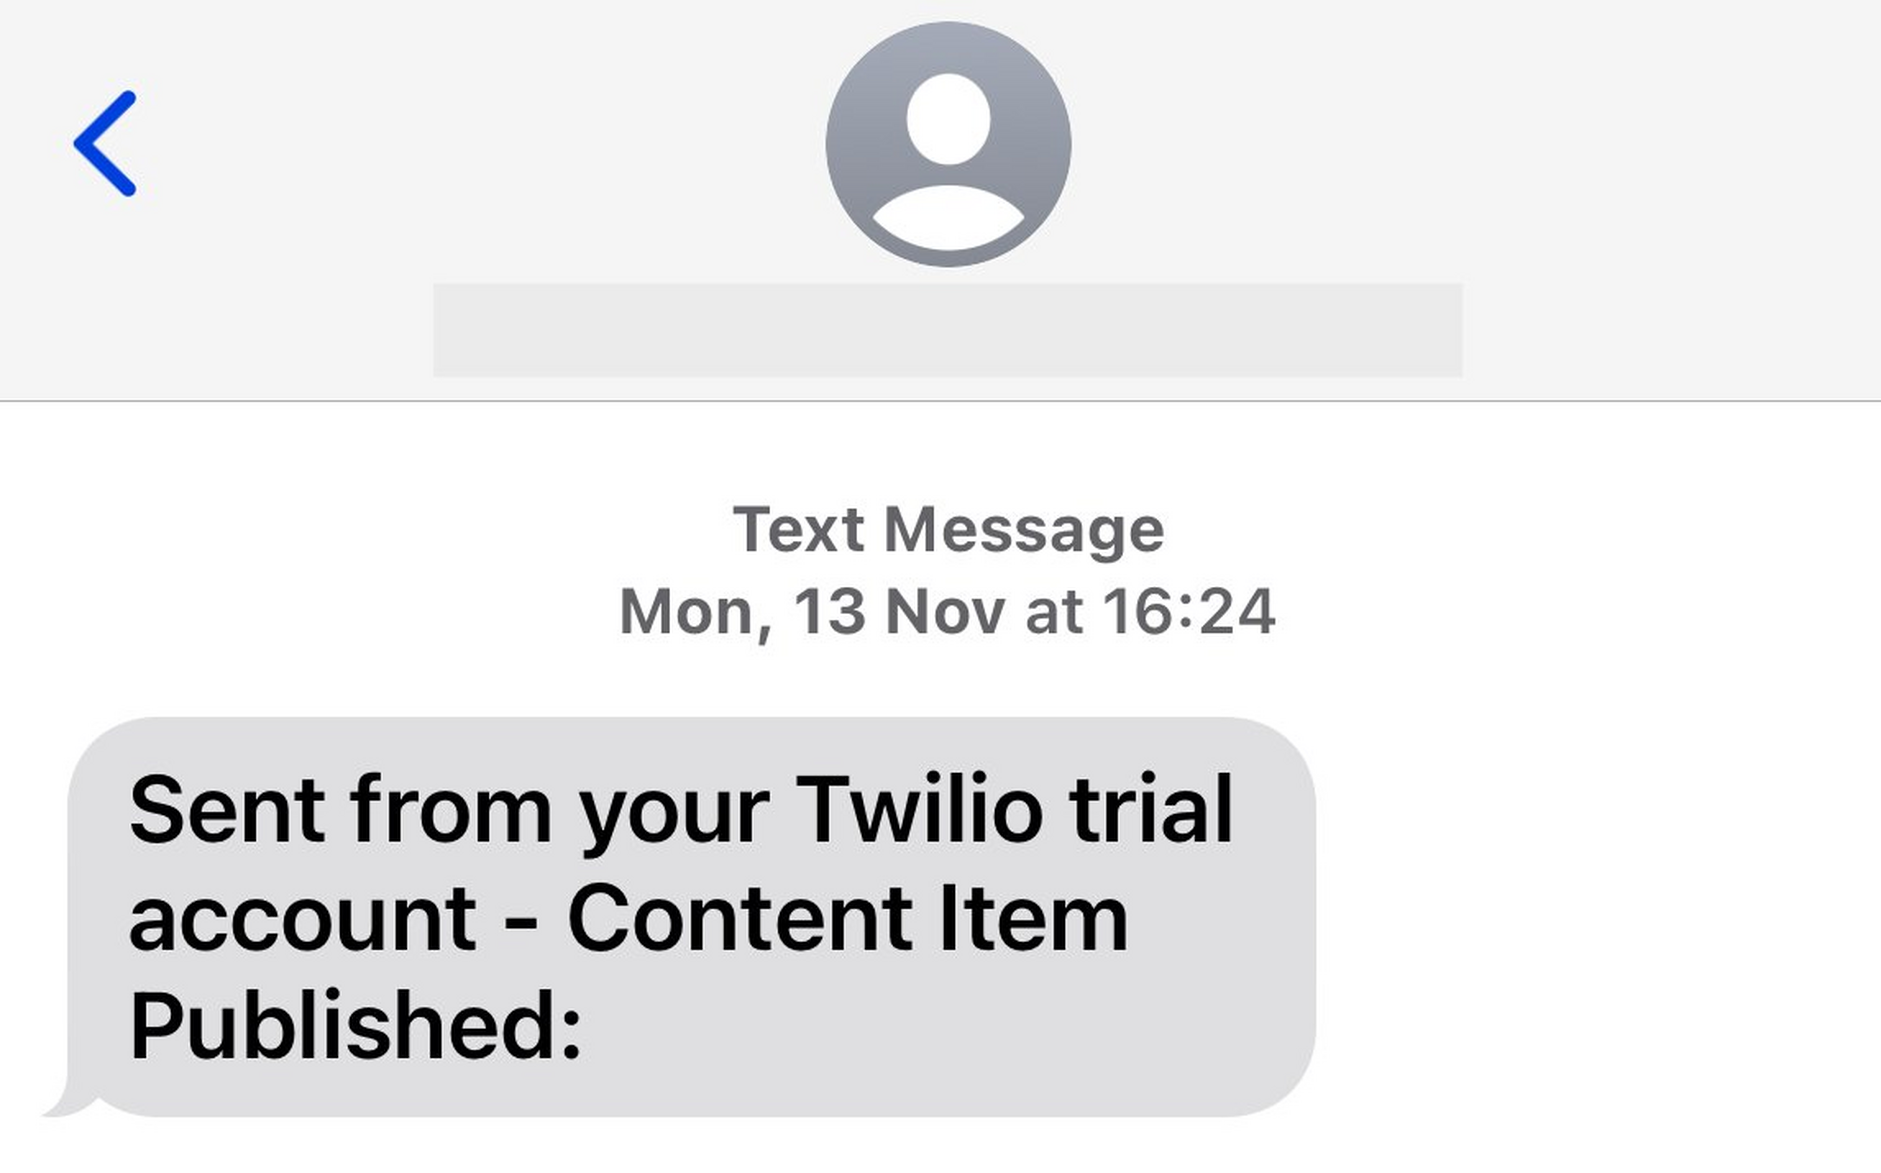 We have received our SMS message from Twilio